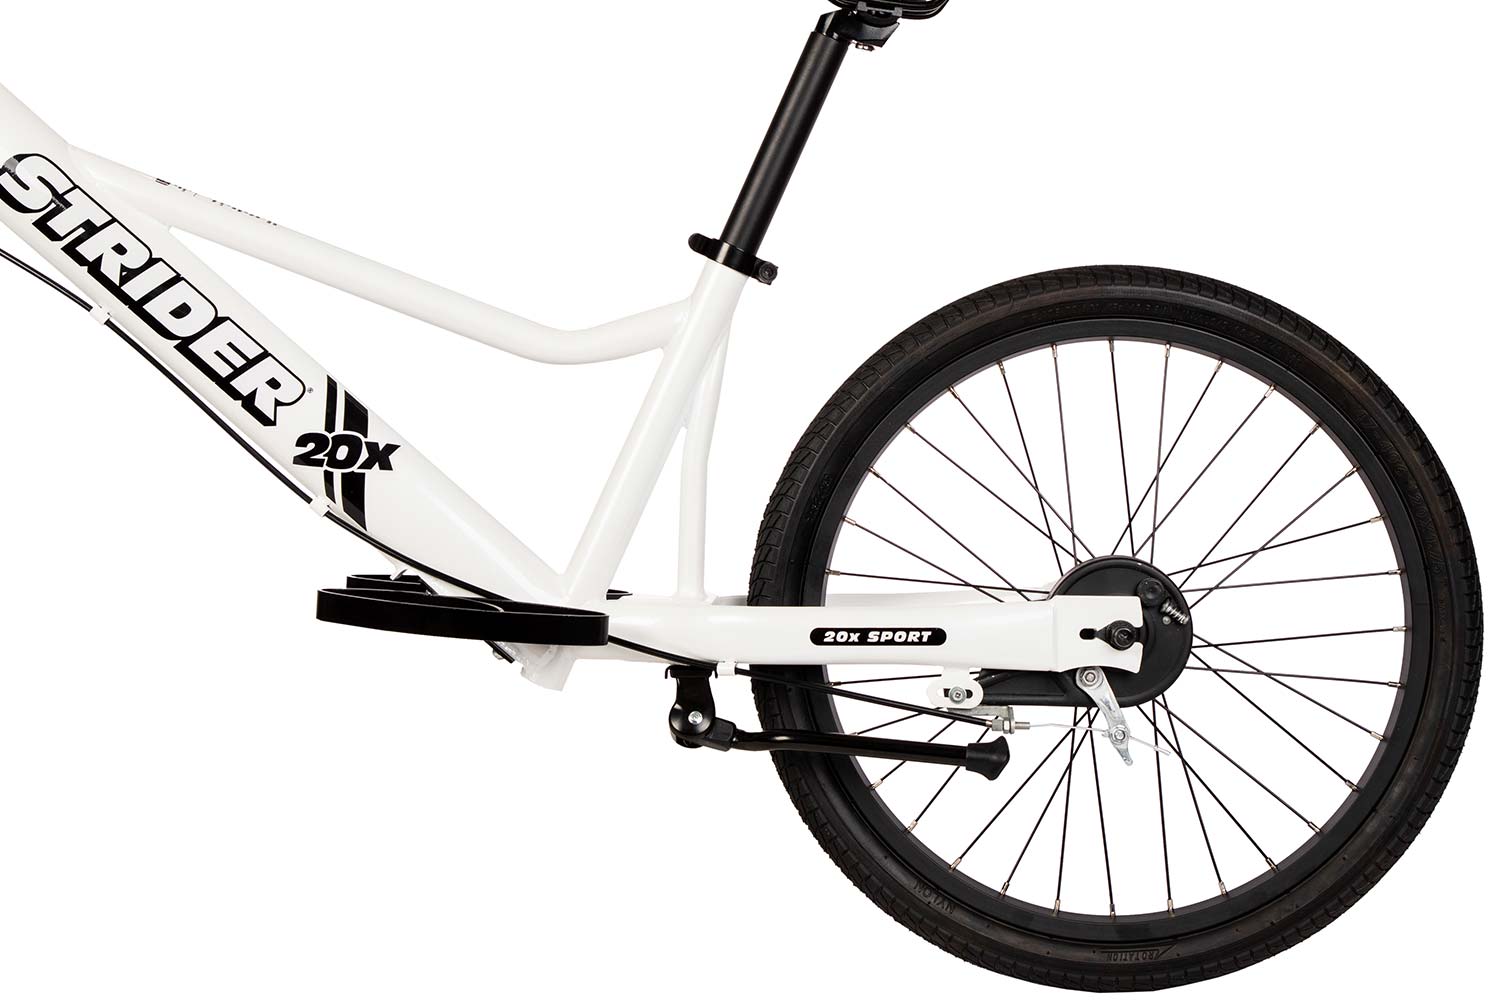 A studio detail of the rear wheel and rear drum brake on the Strider 20x Sport, a 20" all-in-one balance and pedal bike